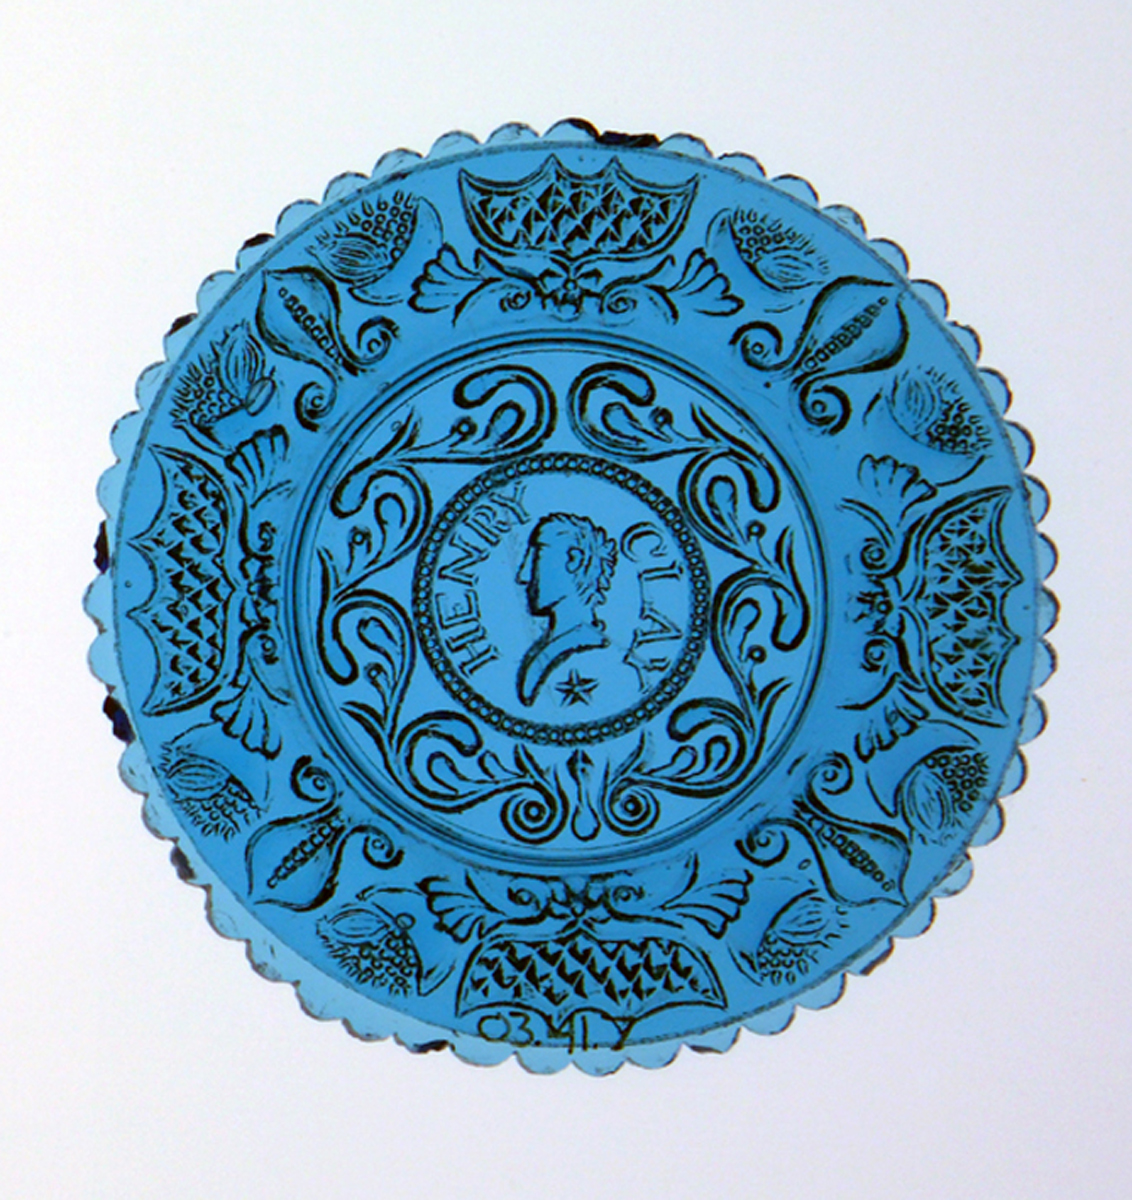 2003.0041.007 Henry Clay glass cup plate